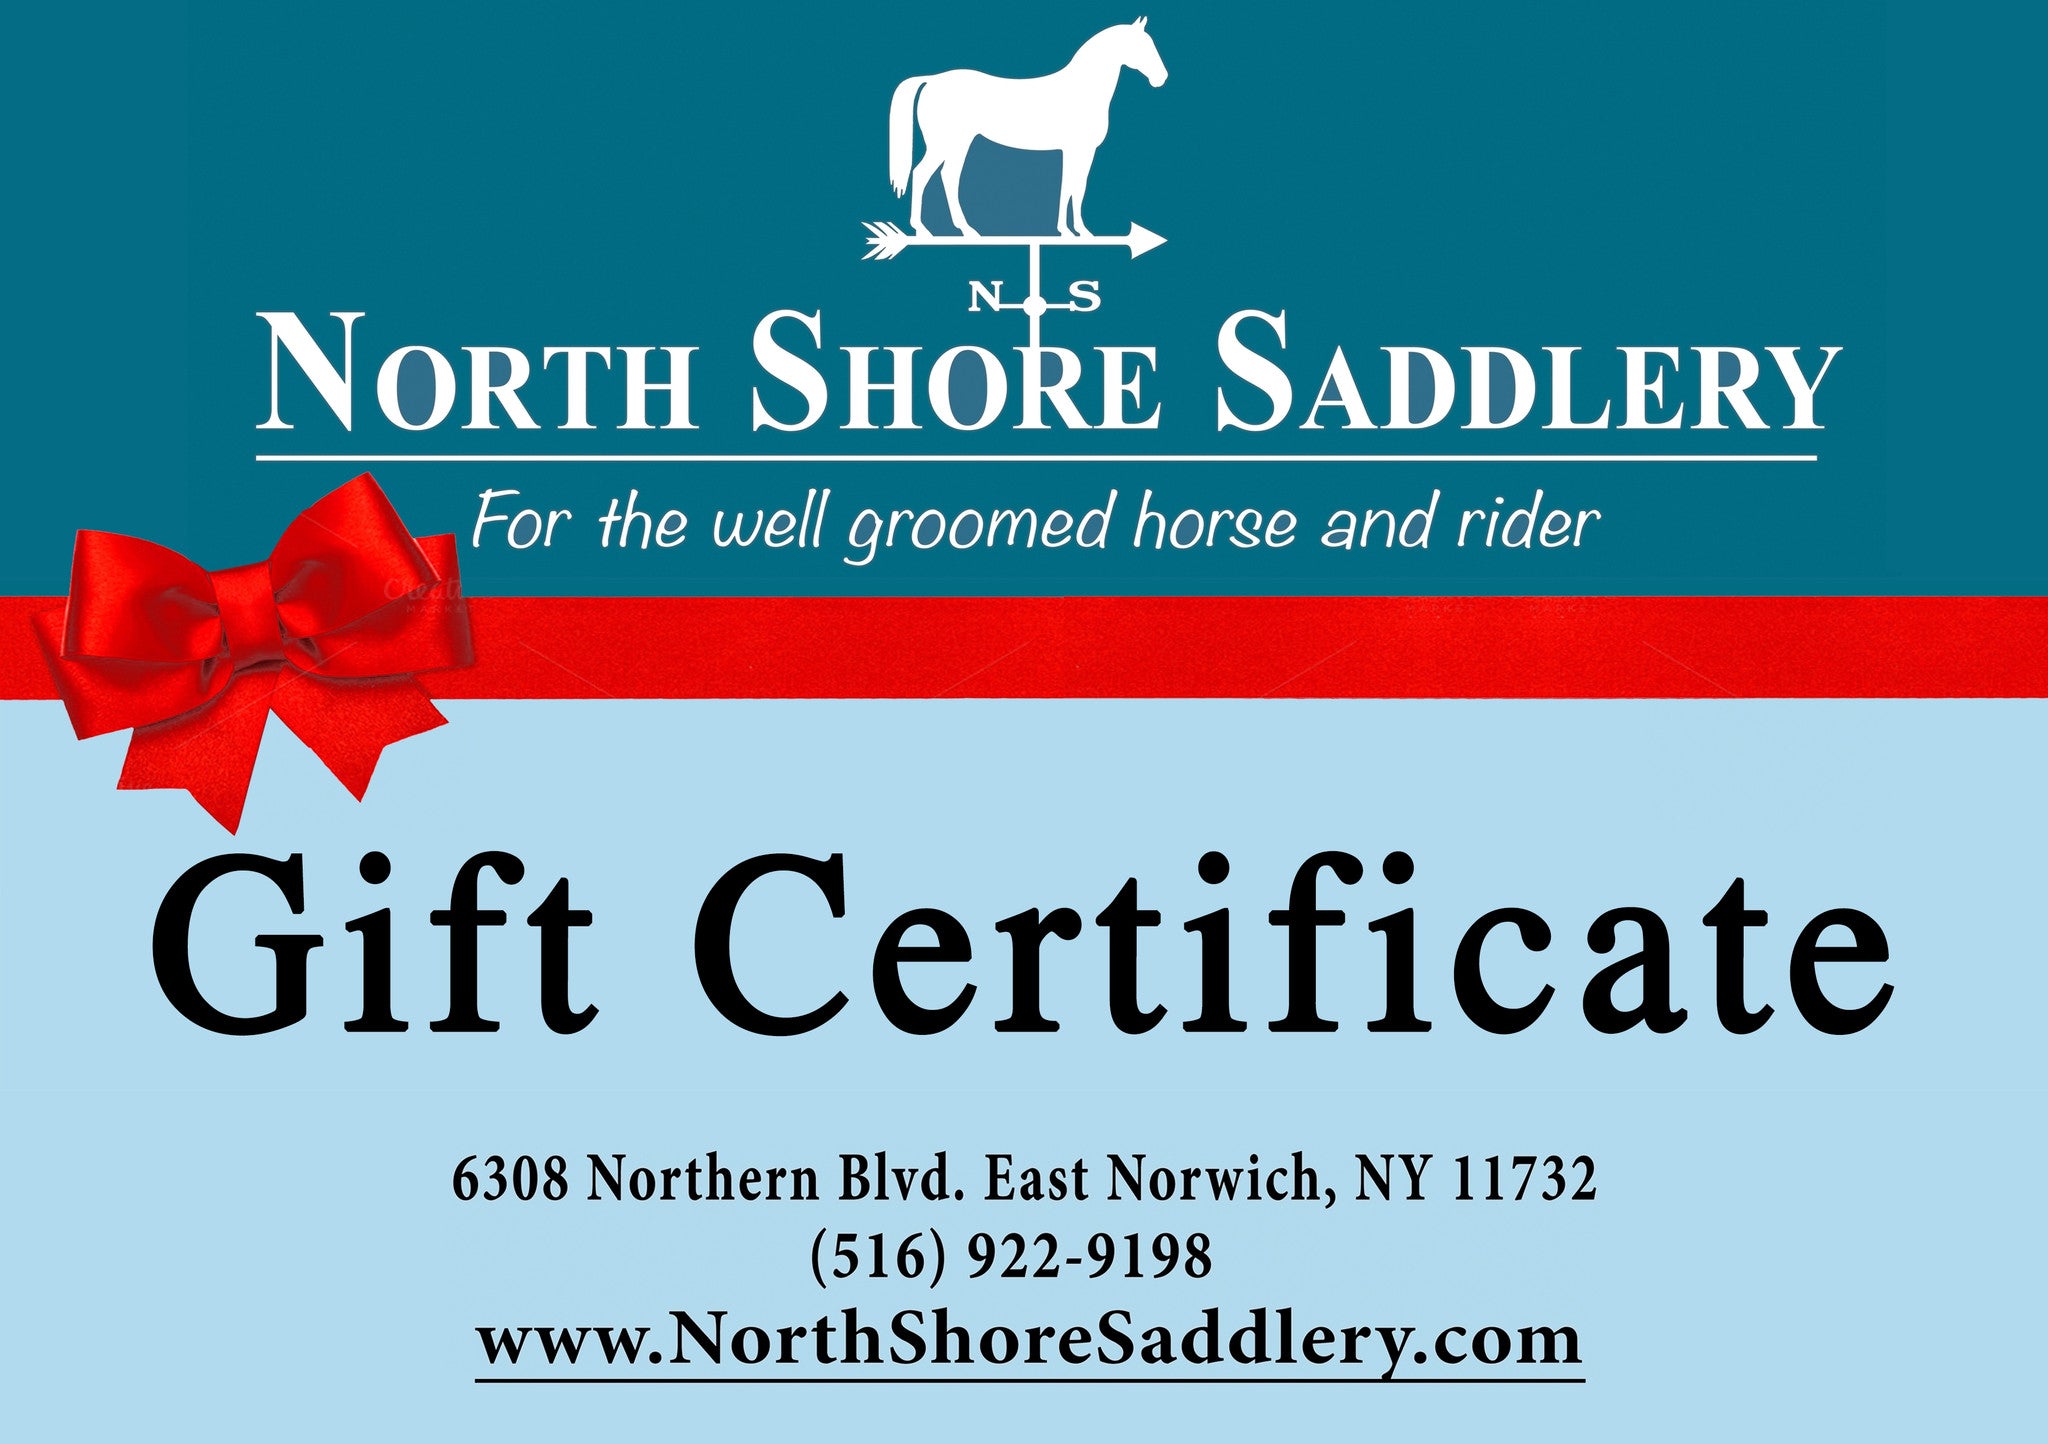 Gift Certificate to North Shore Saddlery - North Shore Saddlery